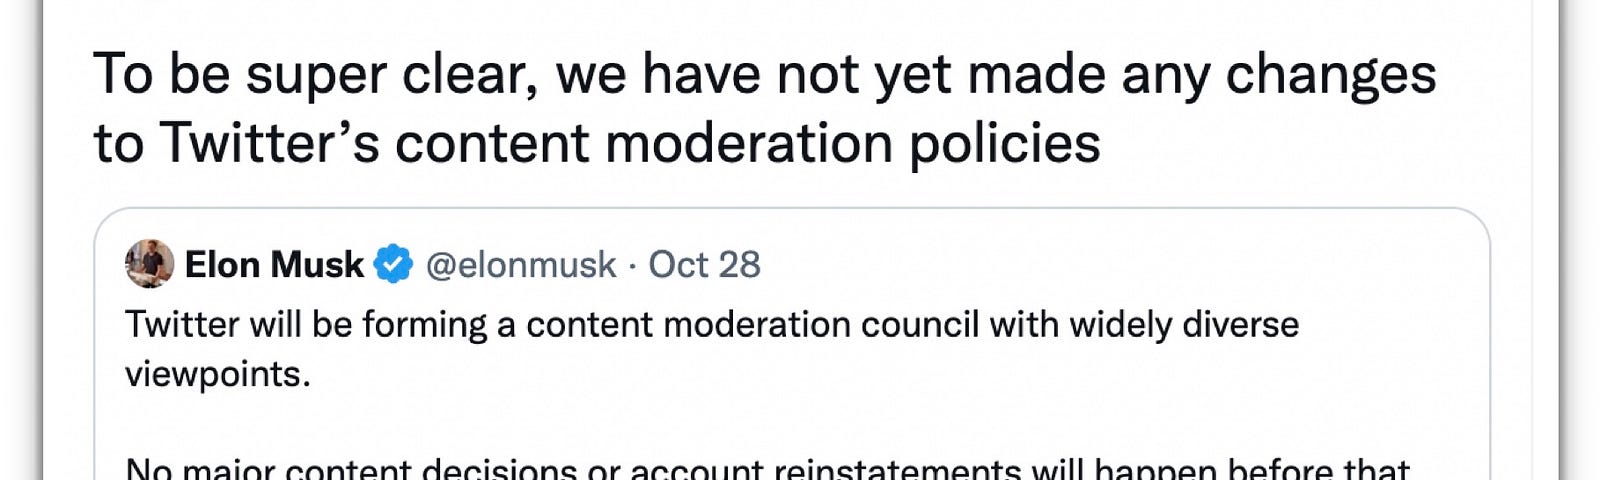 IMAGE: A tweet by Elon Musk stating that “To be super clear, we have not yet made any changes to Twitter’s content moderation policies”